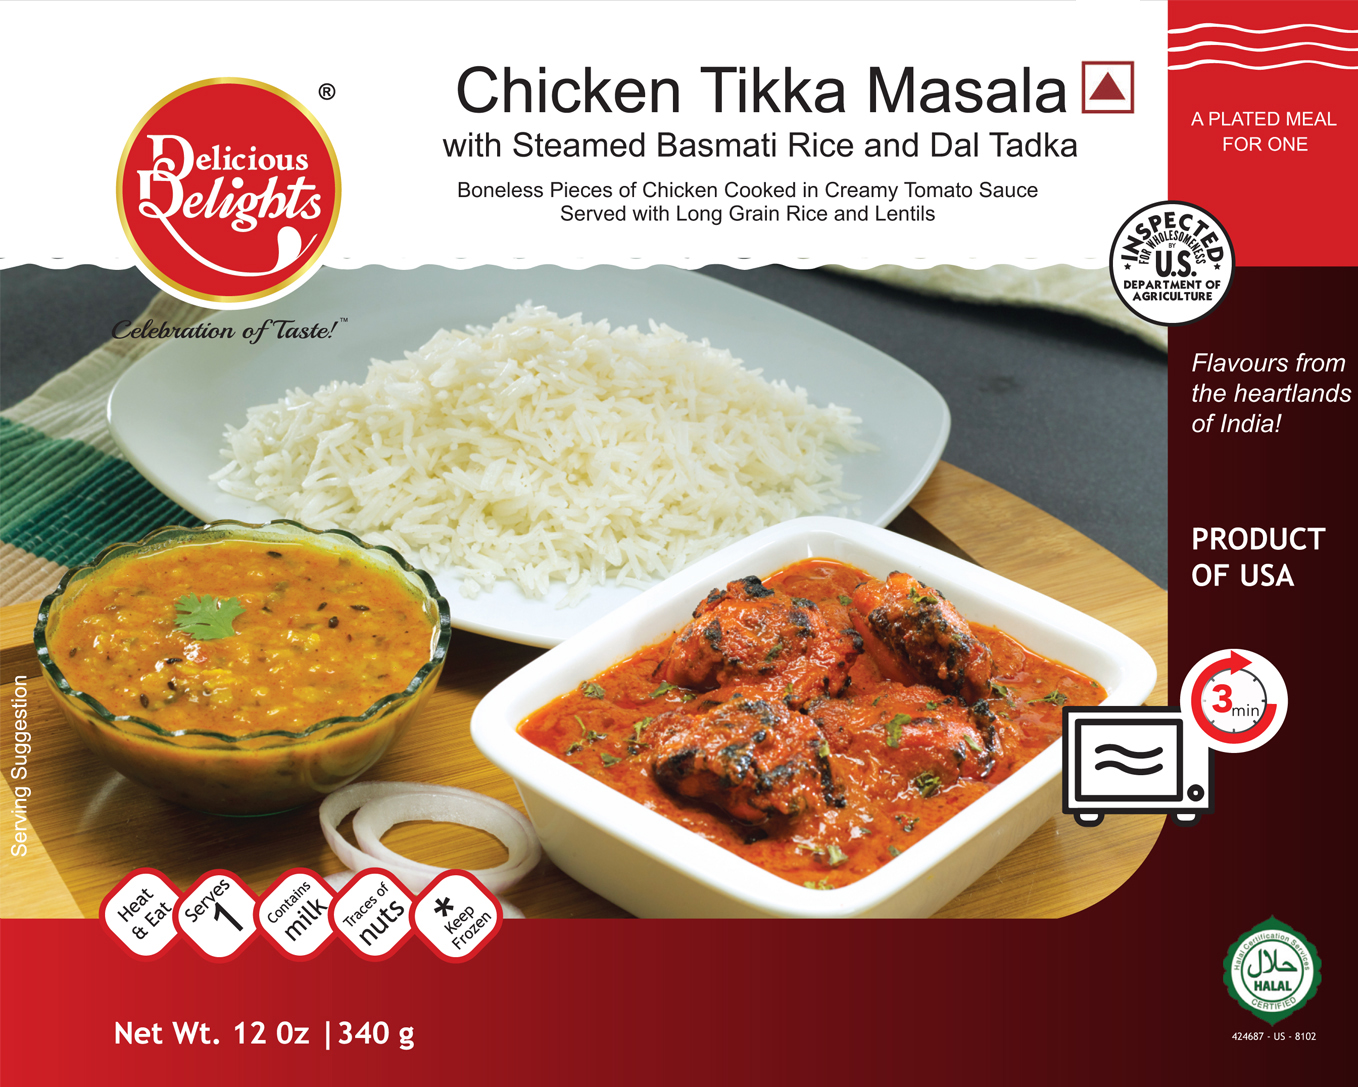 Delicious Delights Chicken Tikka Masala with Steamed Basmati Rice and Dal Tadka